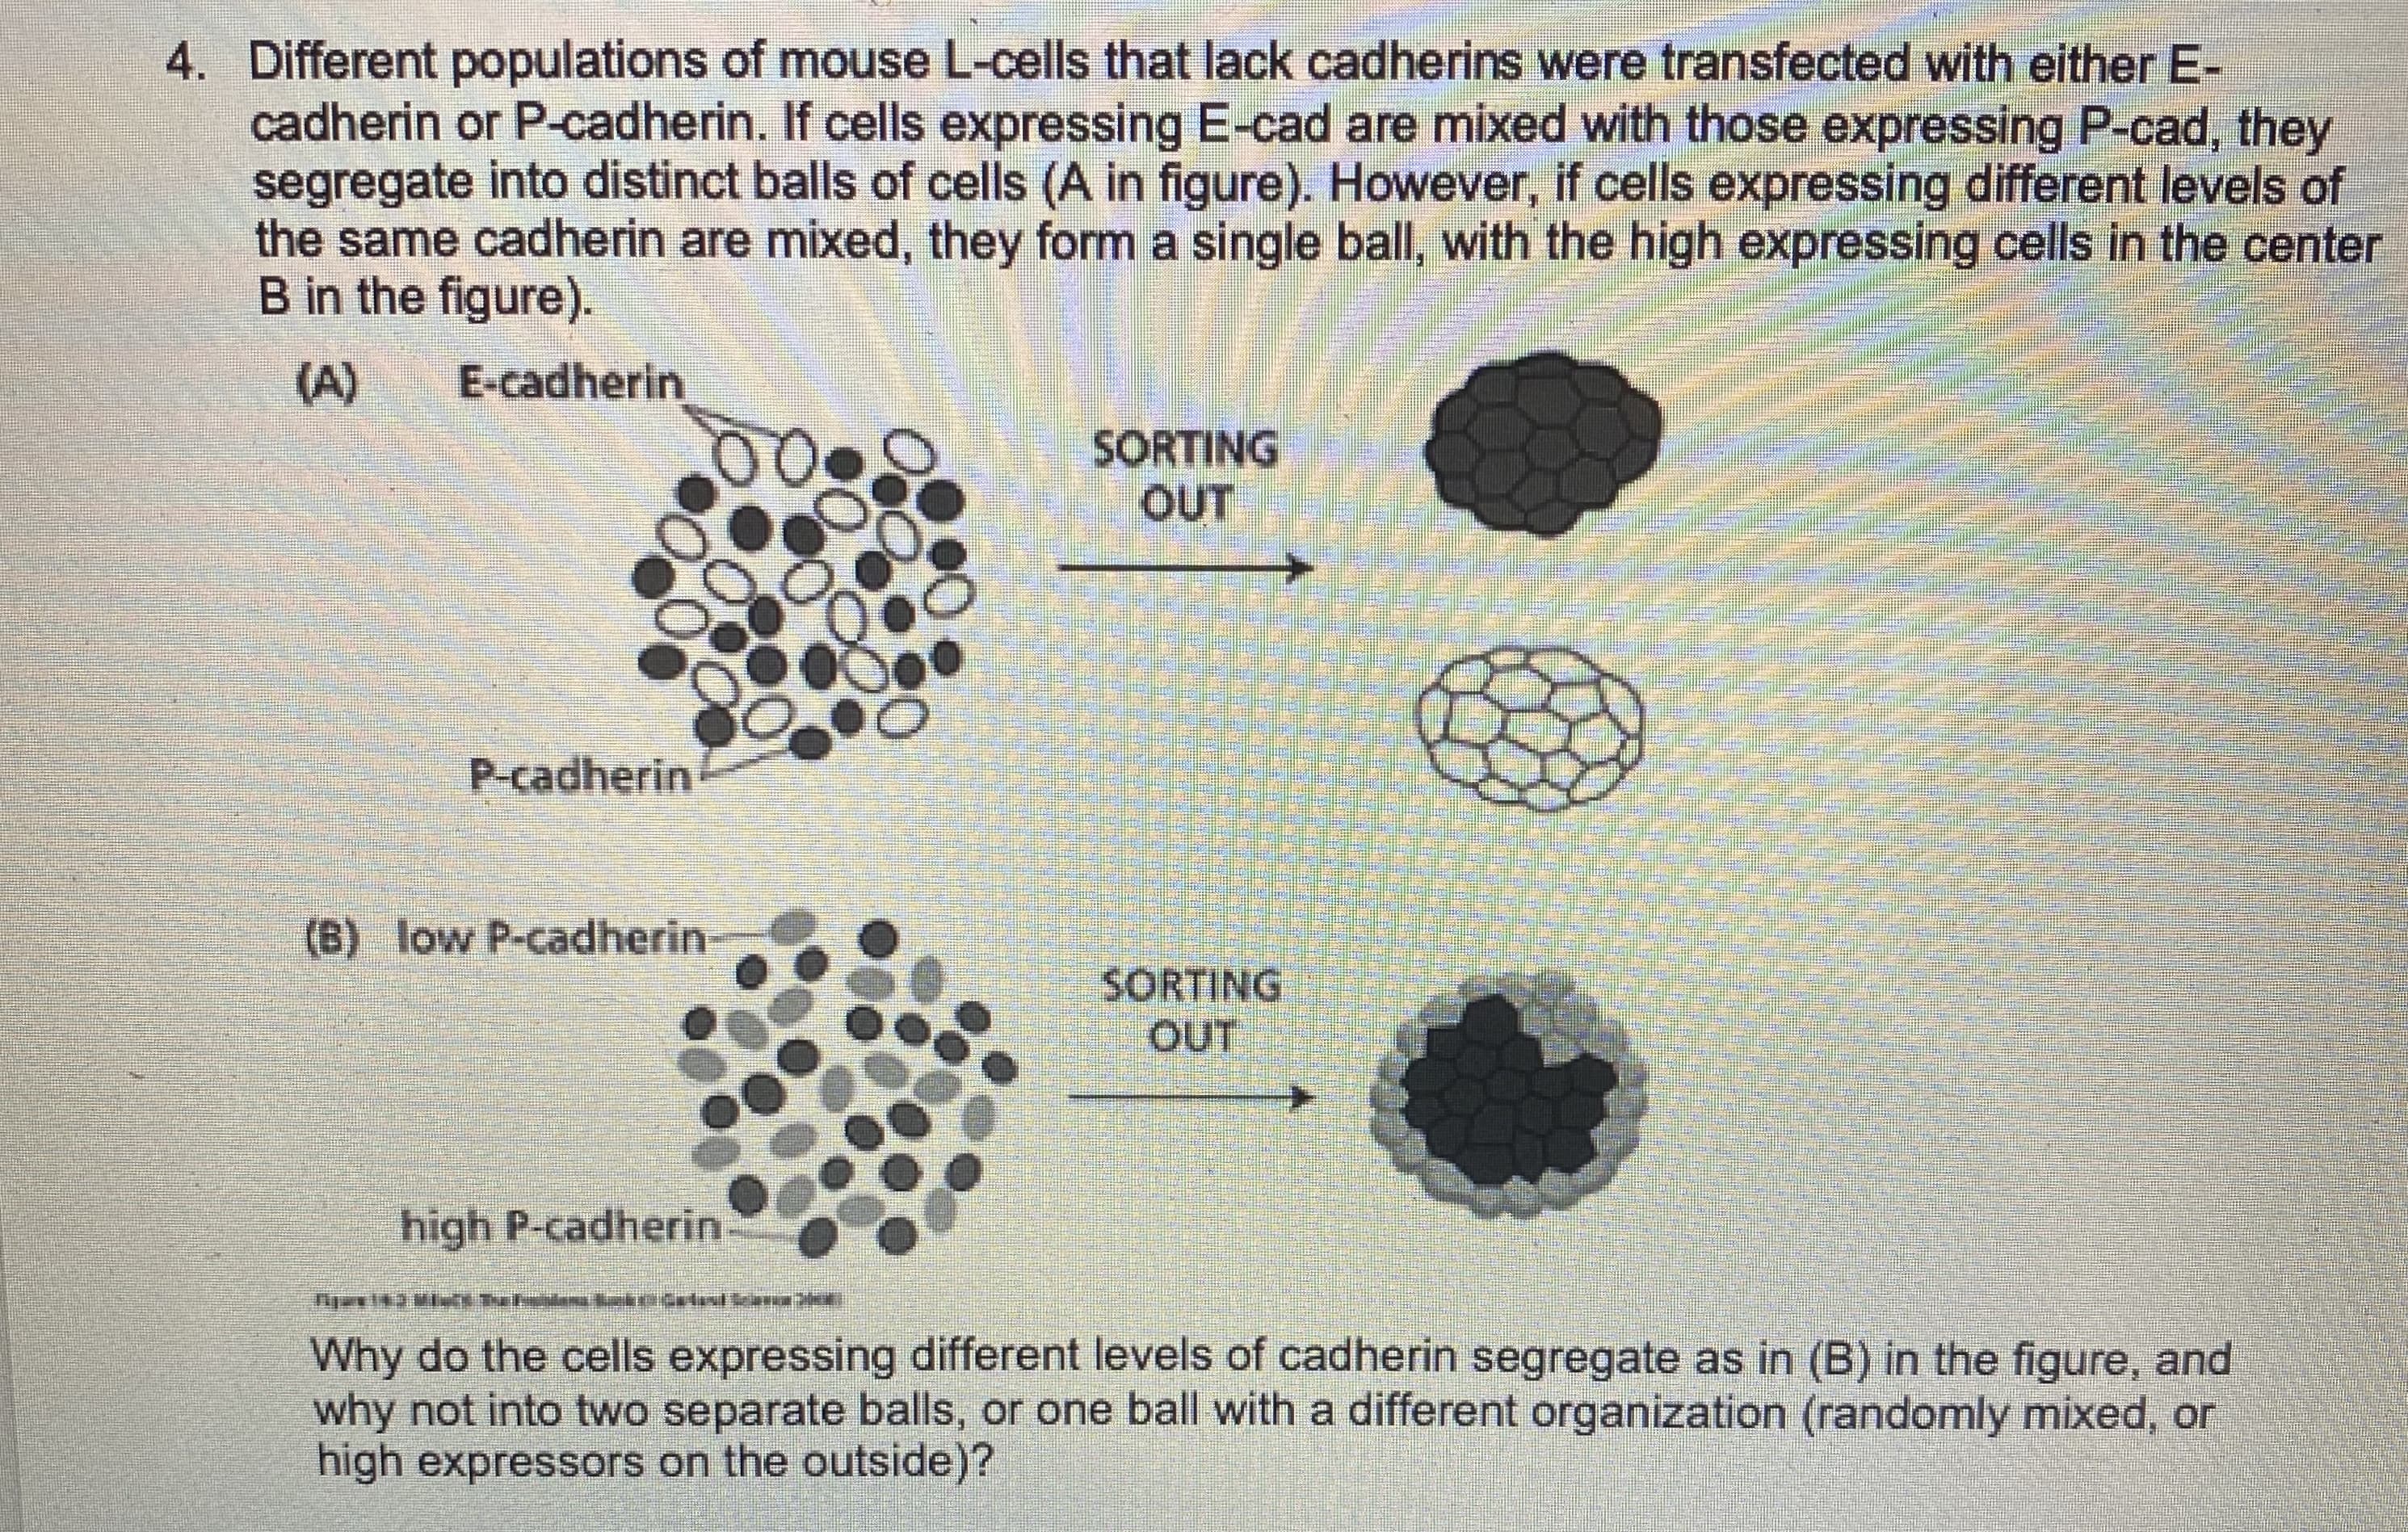 4. Different populations of mouse L-cells that lack cadherins were transfected with either E-
cadherin or P-cadherin. If cells expressing E-cad are mixed with those expressing P-cad, they
segregate into distinct balls of cells (A in figure). However, if cells expressing different levels of
the same cadherin are mixed, they form a single ball, with the high expressing cells in the center
B in the figure).
(A)
E-cadherin
SORTING
OUT
P-cadherin
(B) low P-cadherin
SORTING
OUT
high P-cadherin
Why do the cells expressing different levels of cadherin segregate as in (B) in the figure, and
why not into two separate balls, or one ball with a different organization (randomly mixed, or
high expressors on the outside)?
